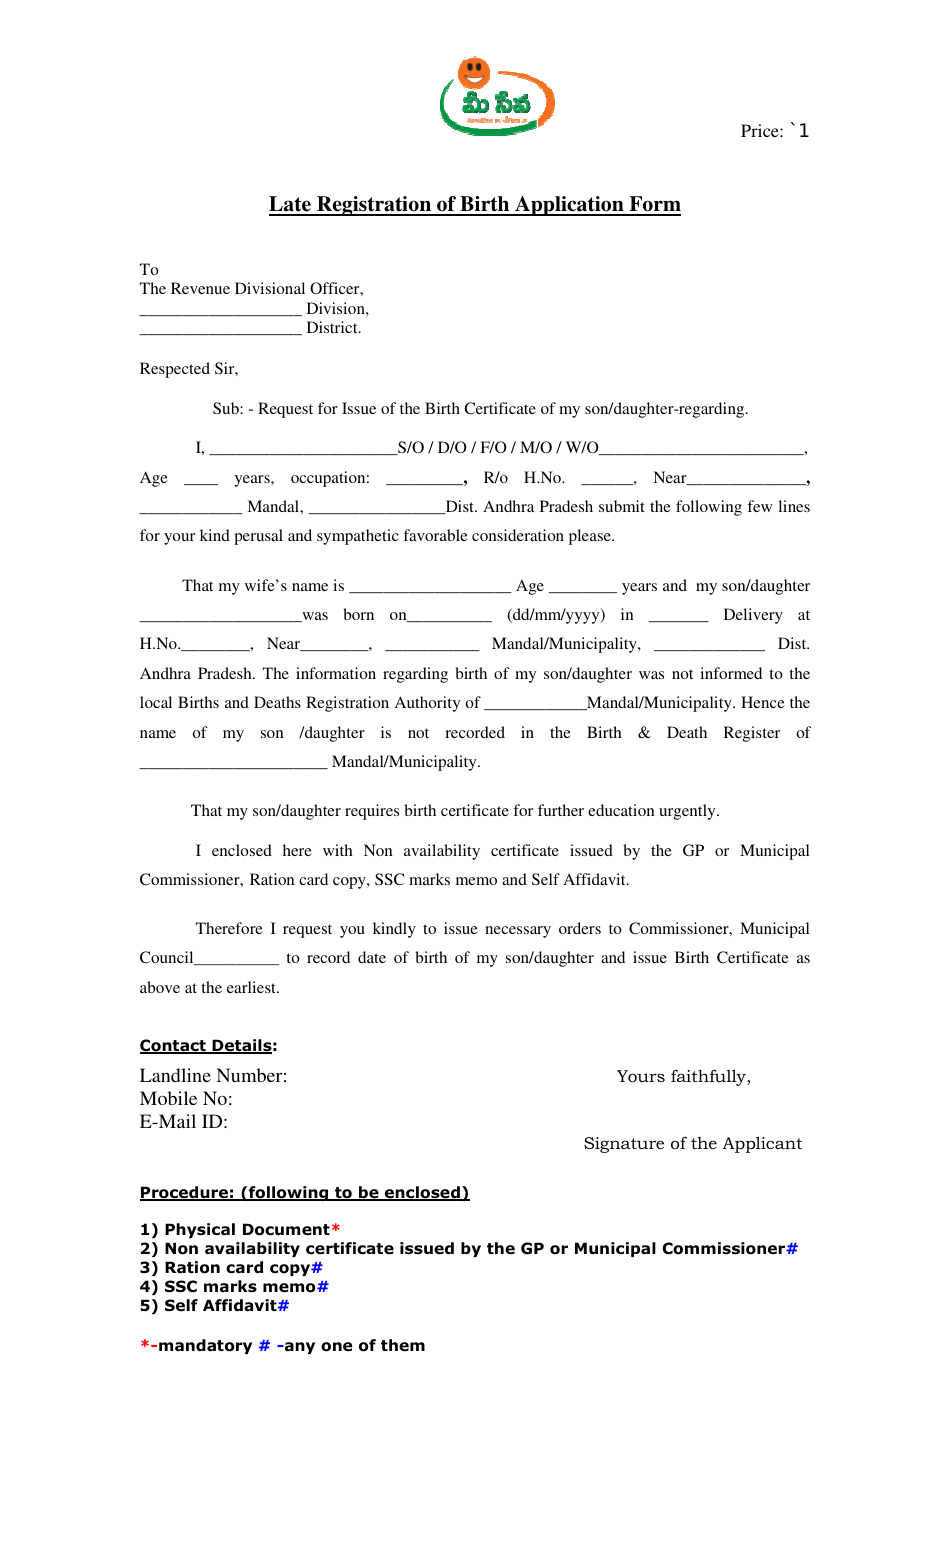 Late Registration of Birth Application Form - Andhra Pradesh, India, Page 1